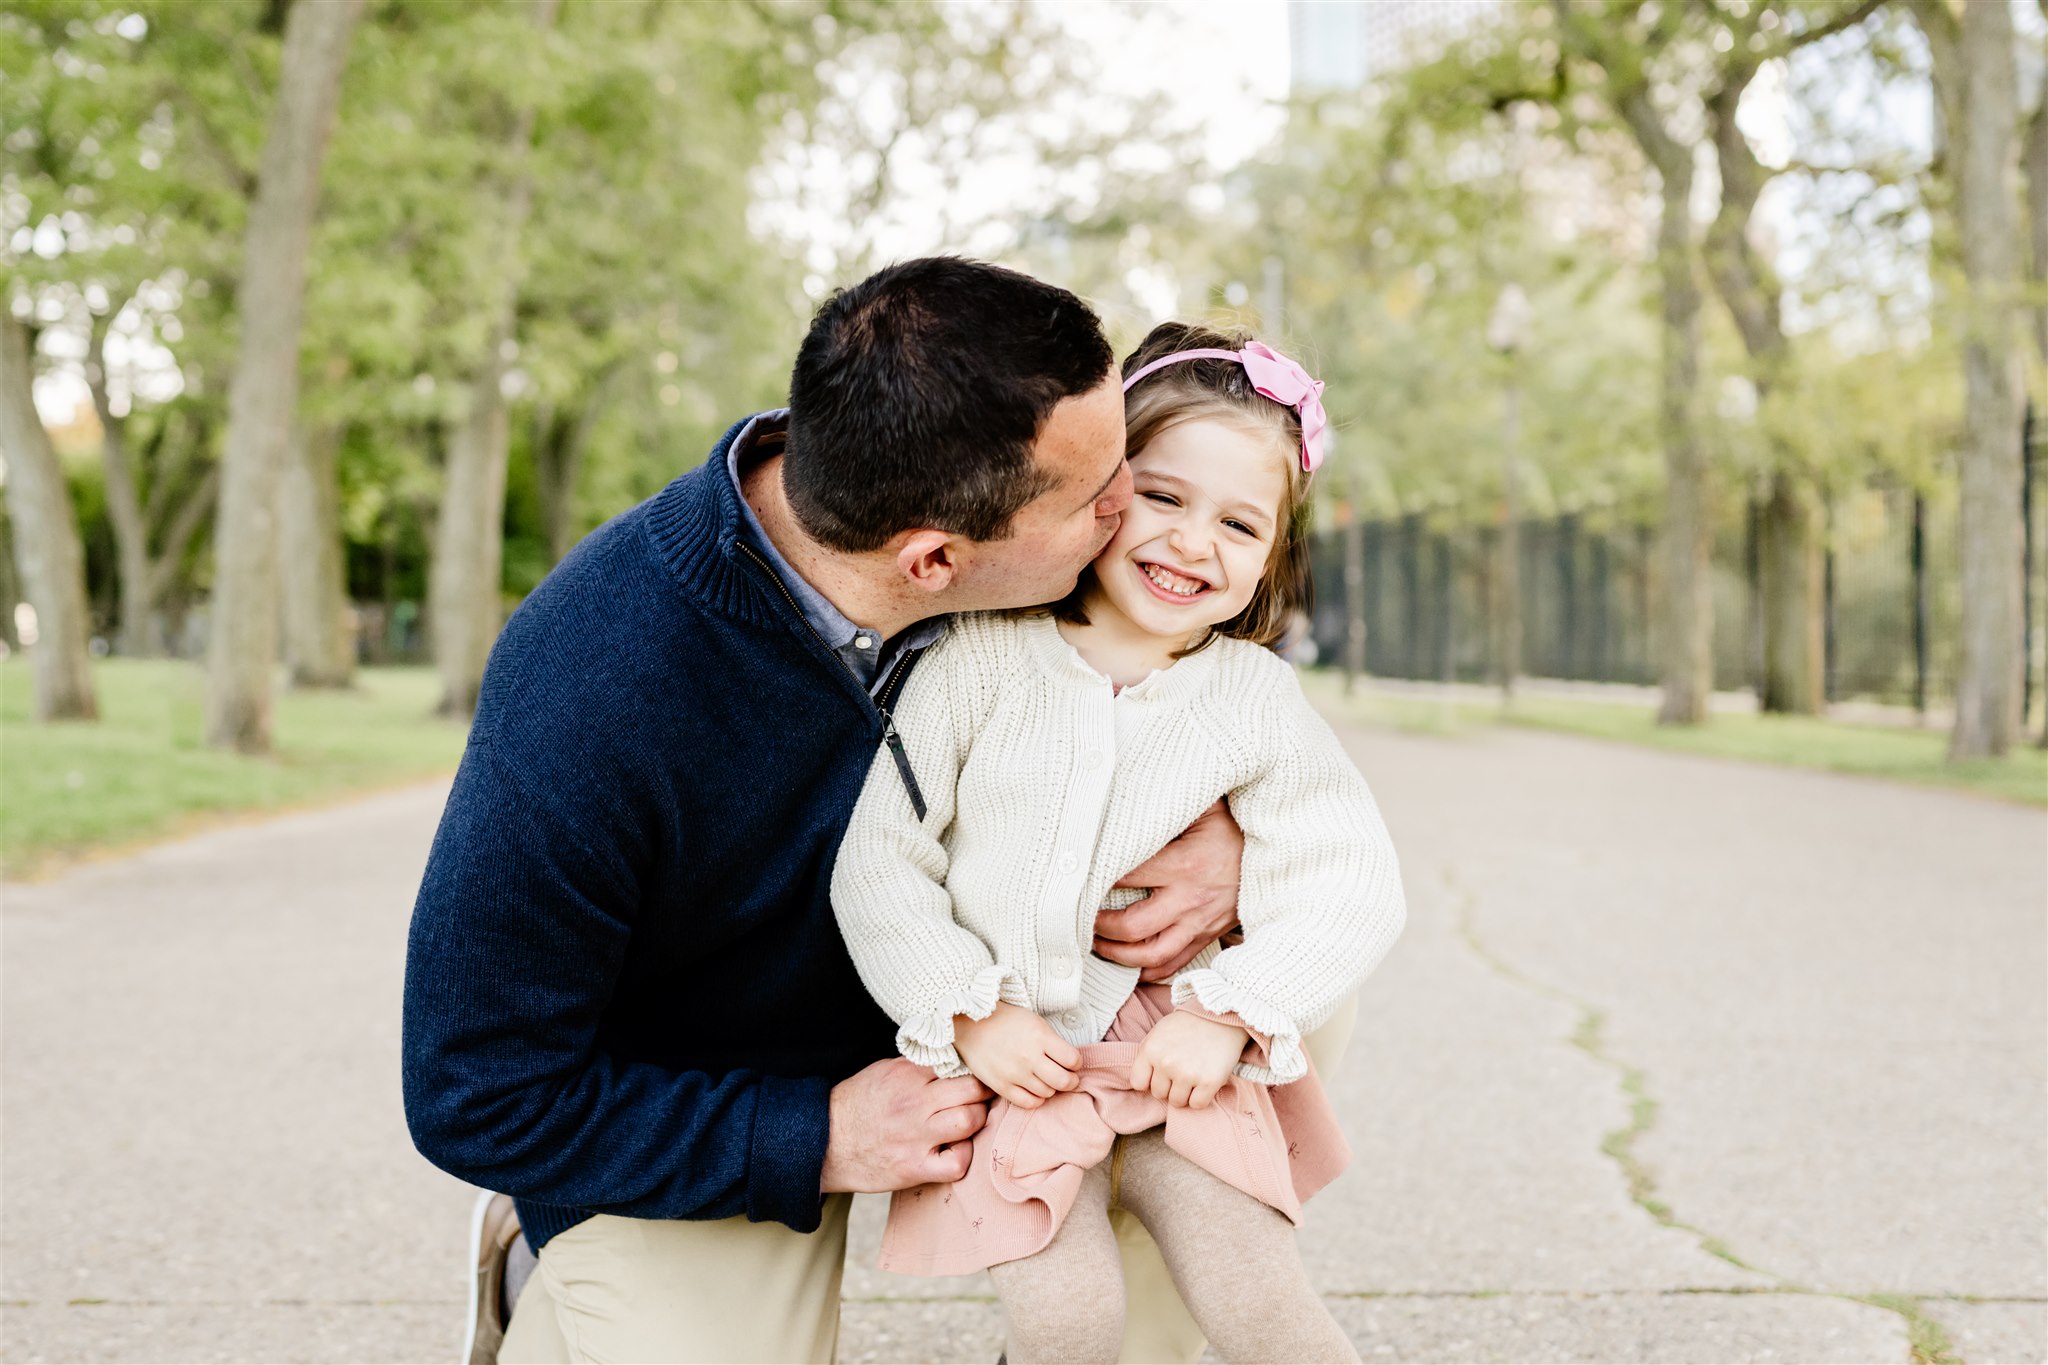 A dad in a blue sweater kisses the cheek of his smiling toddler daughter in a park sidewalk